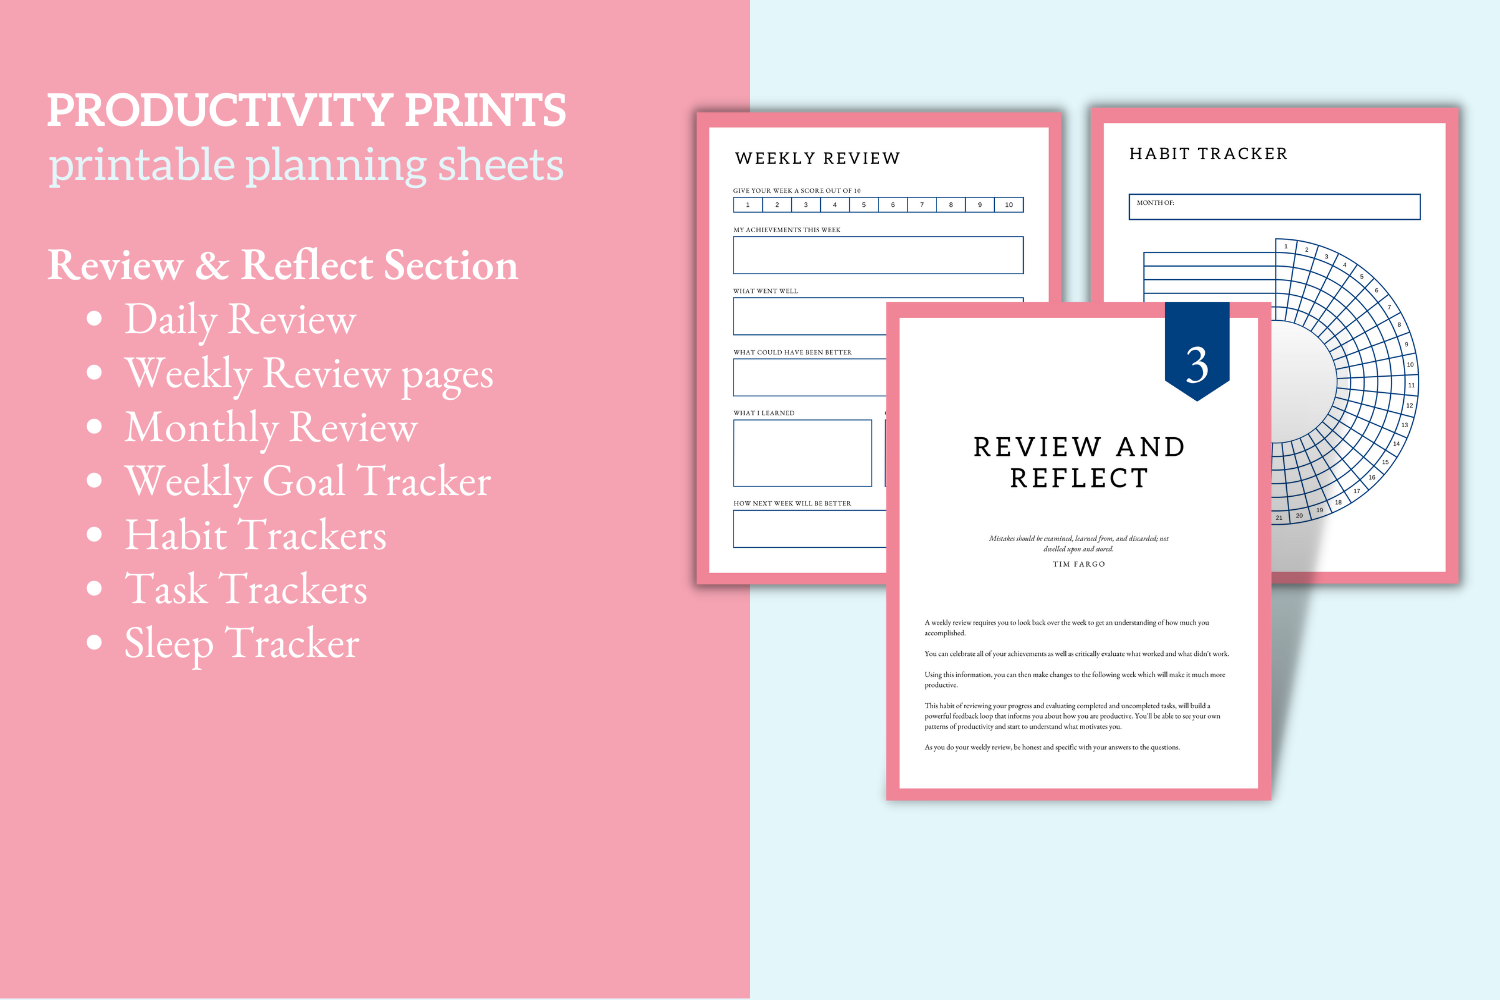 Review and Reflect section in Productivity Prints printable planning sheets mockup.